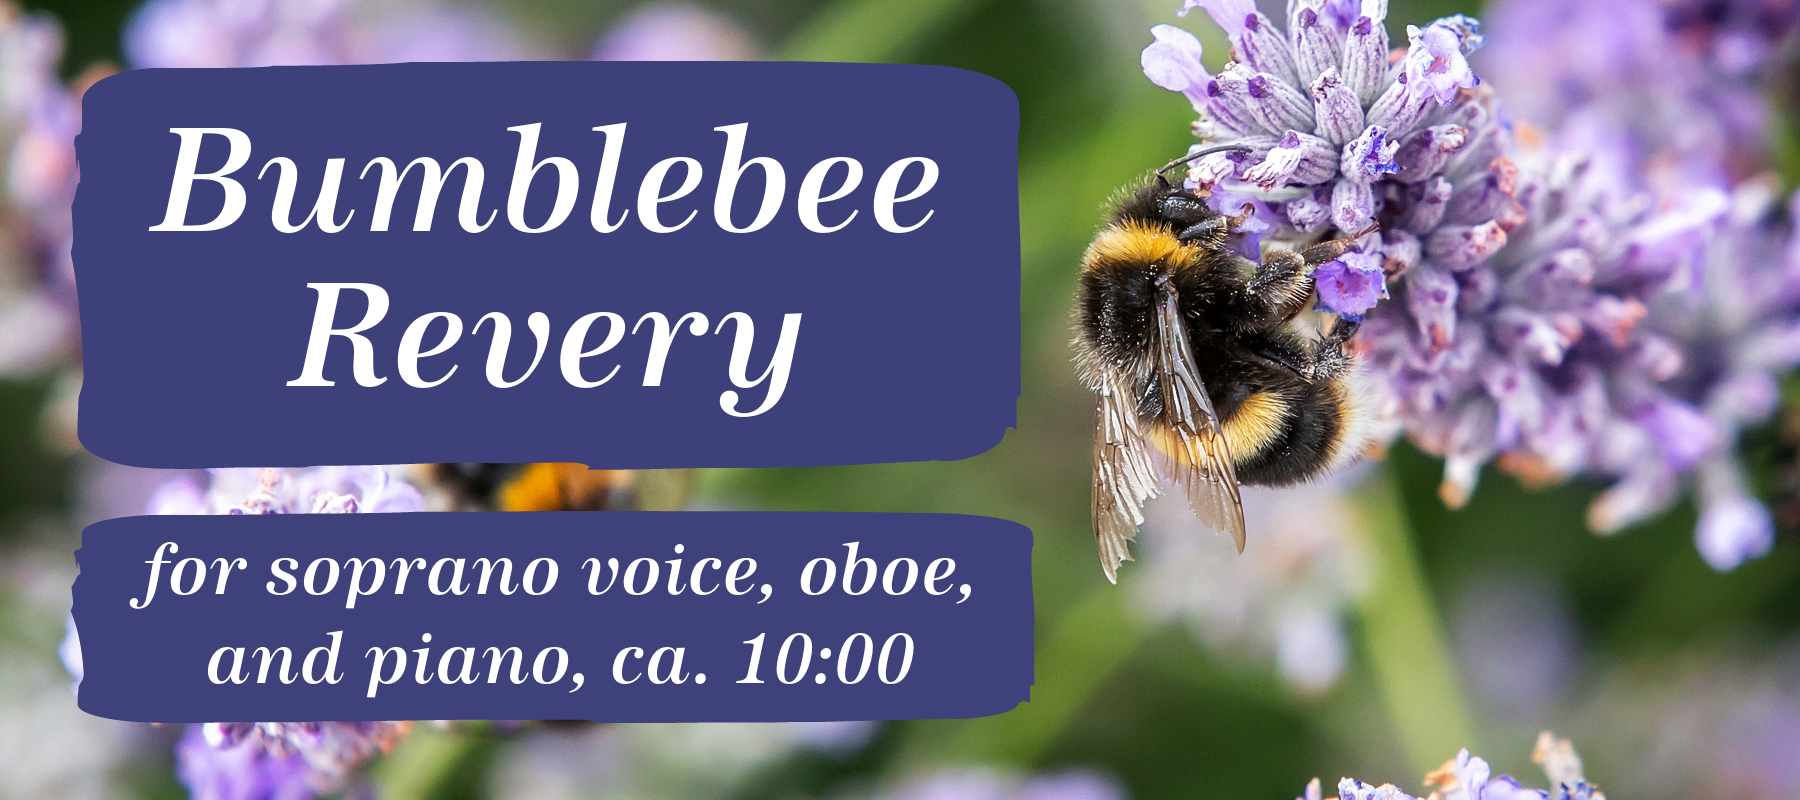 Bumblebee Revery, for soprano voice, oboe, and piano, ca. 10:00